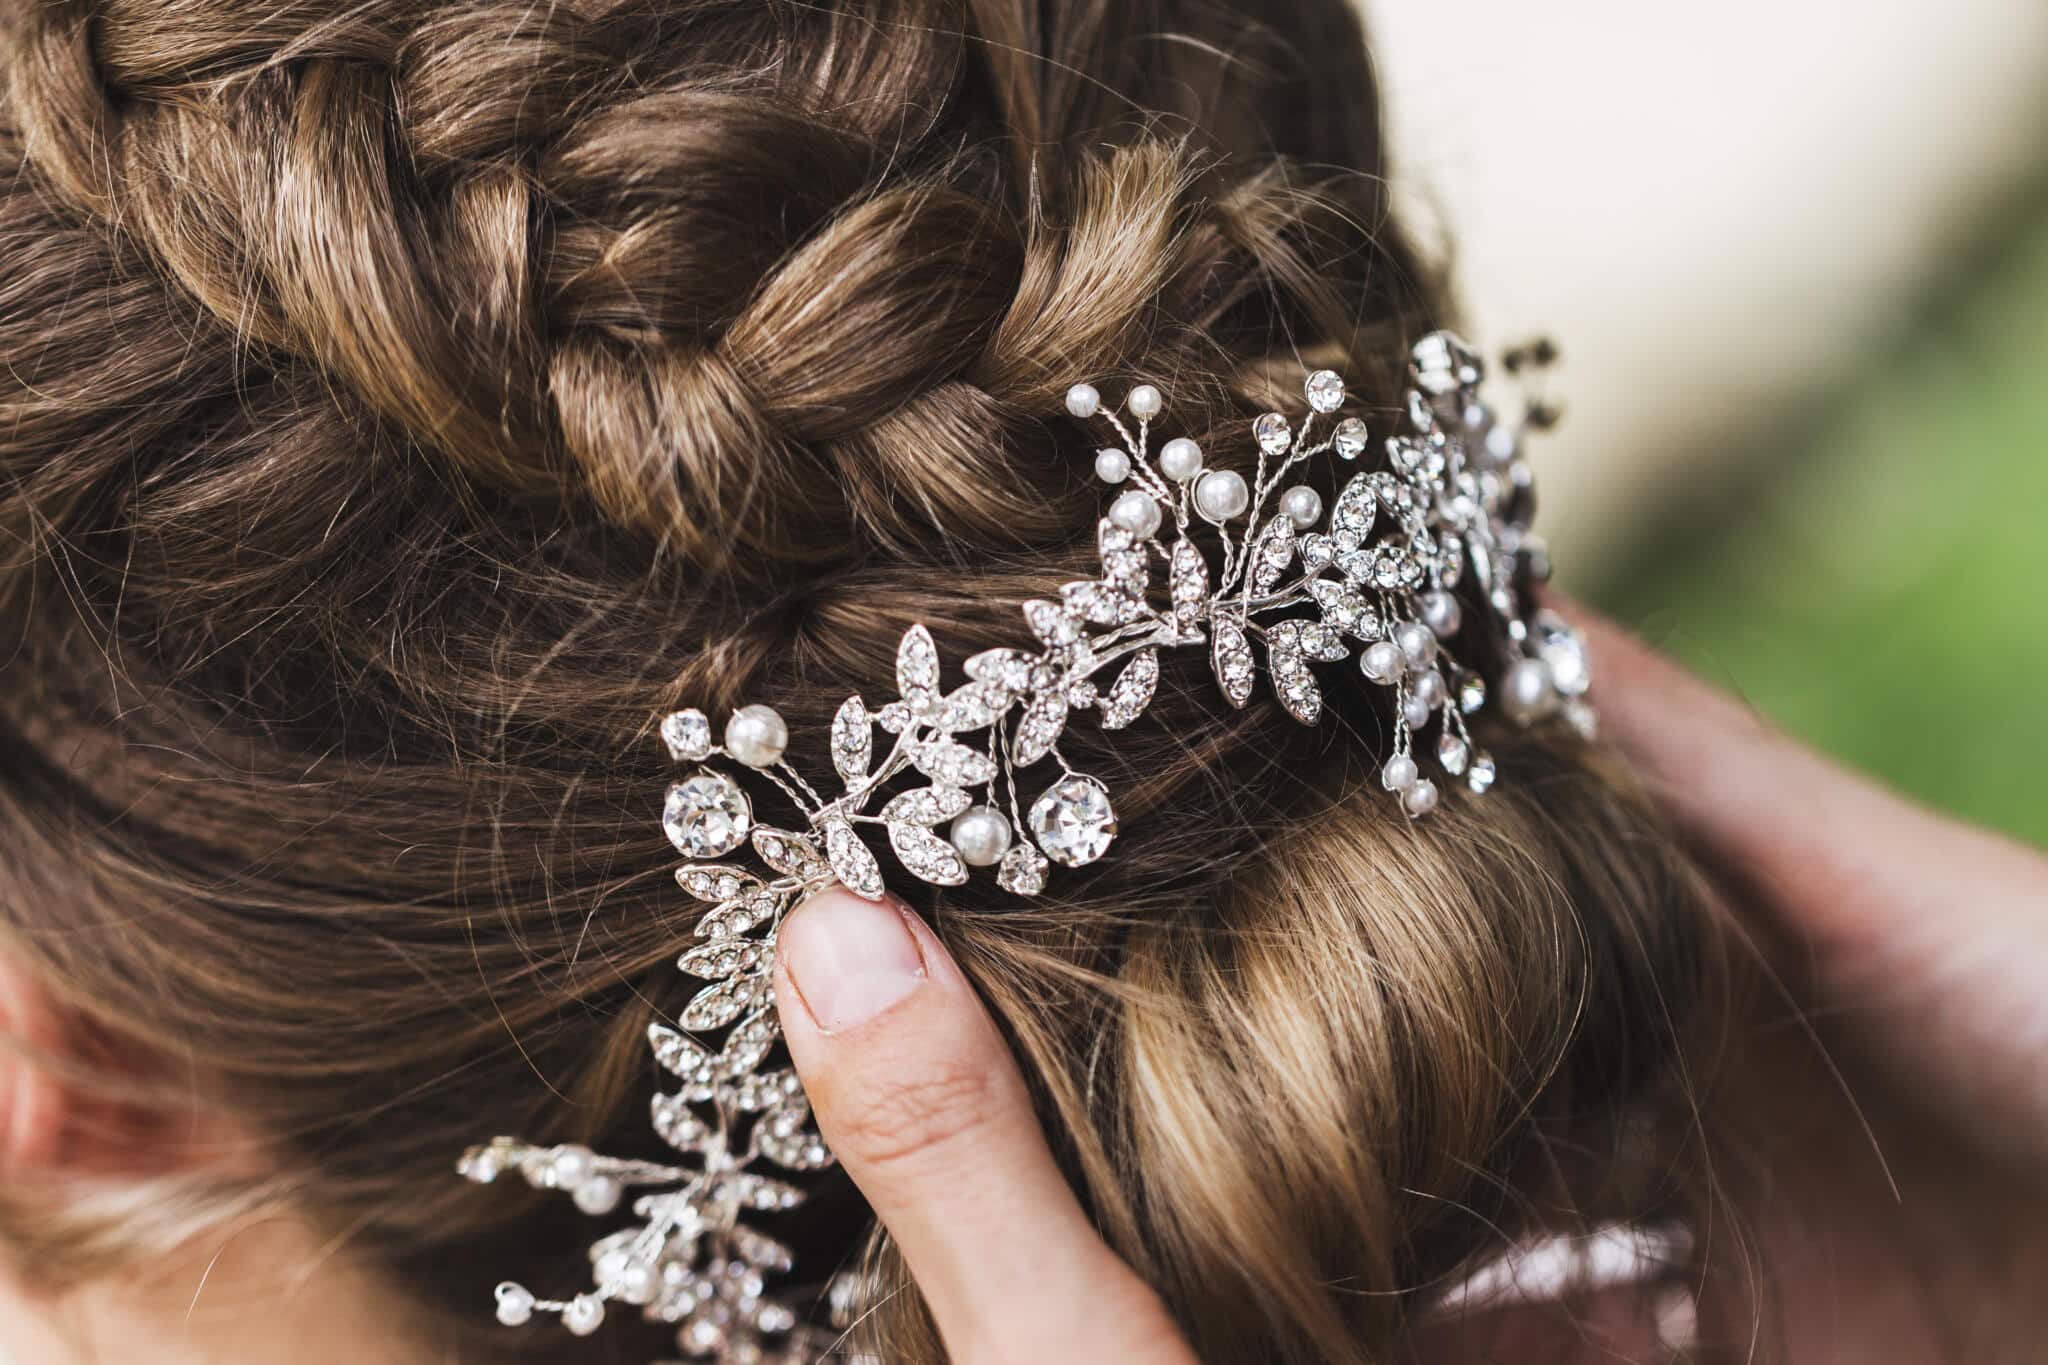 hairpin in the bride's hair, wedding hairstyle with accessories